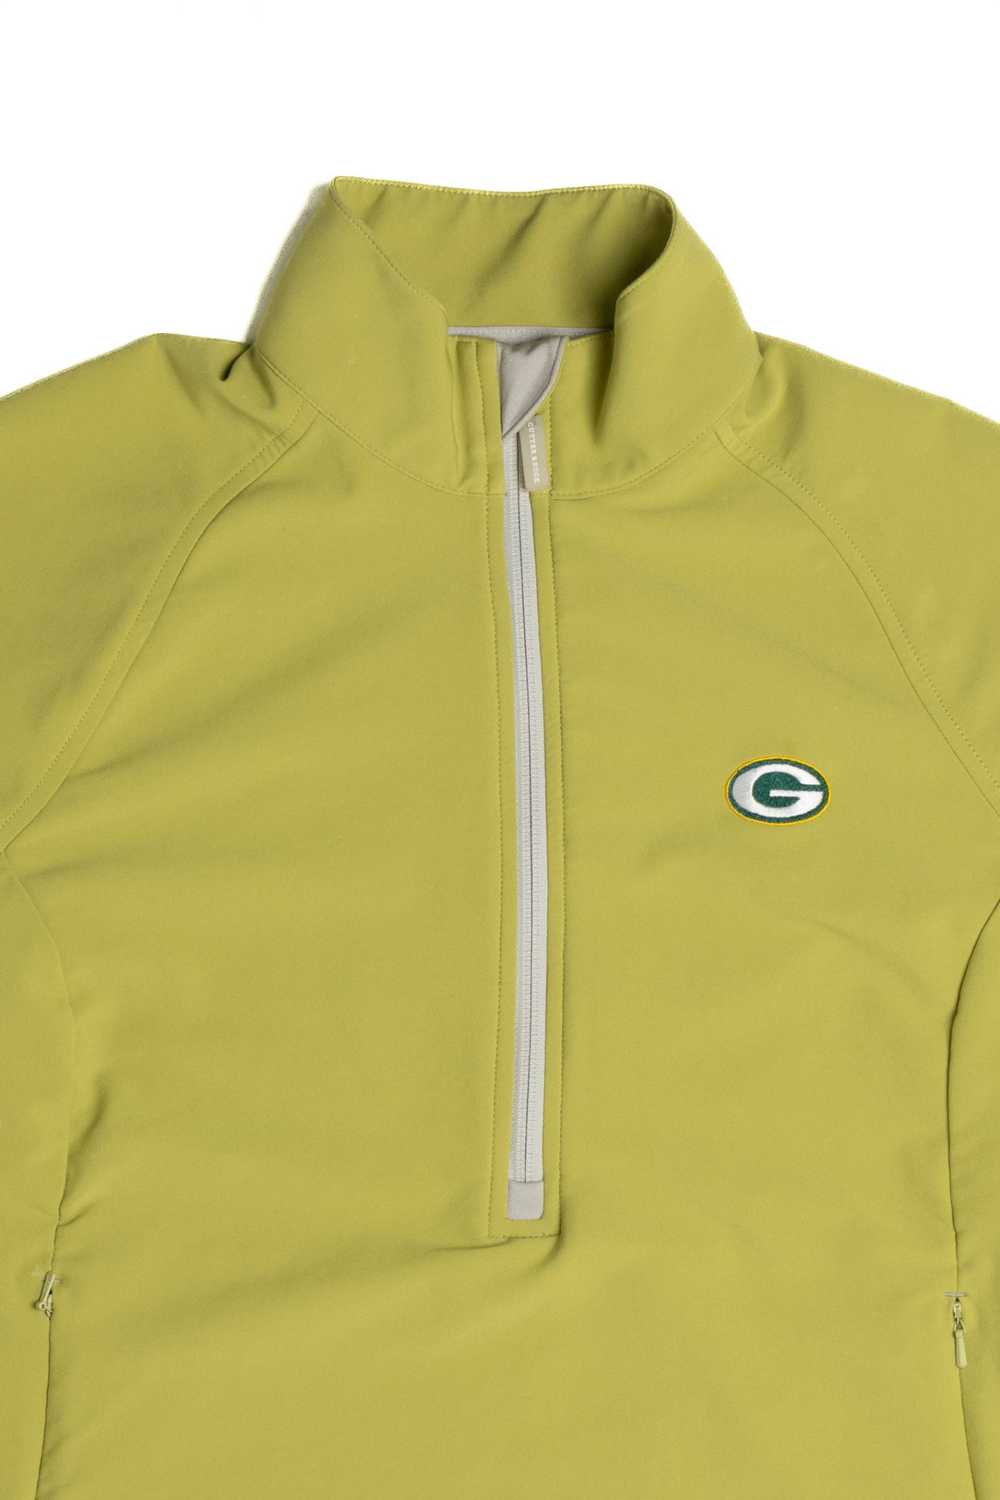 Green Bay Packers Lightweight Jacket - image 1